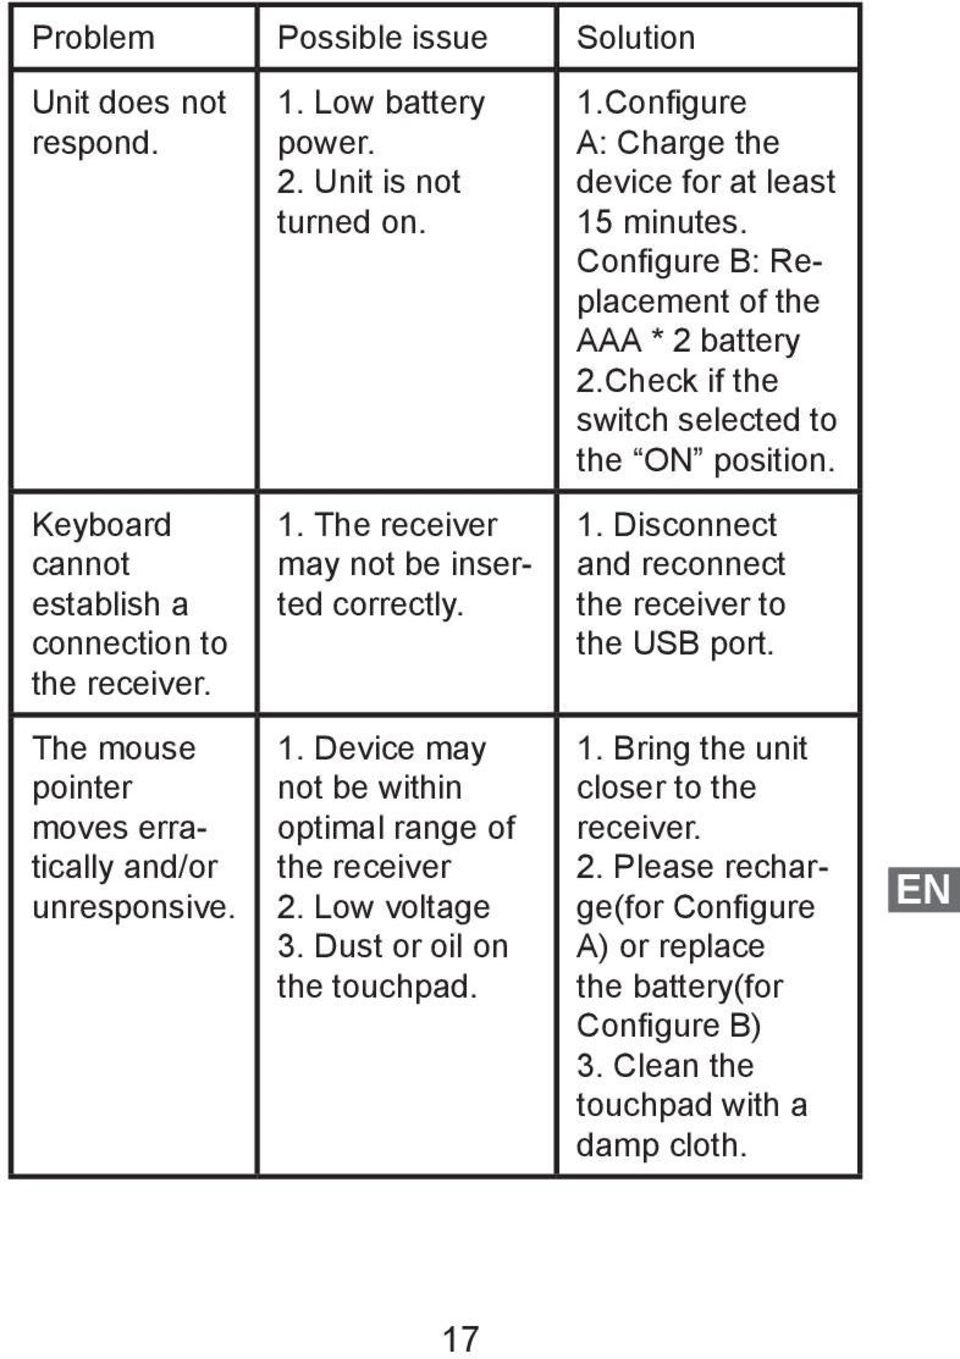 The receiver may not be inserted correctly. 1. Disconnect and reconnect the receiver to the USB port. The mouse pointer moves erratically and/or unresponsive. 1. Device may not be within optimal range of the receiver 2.